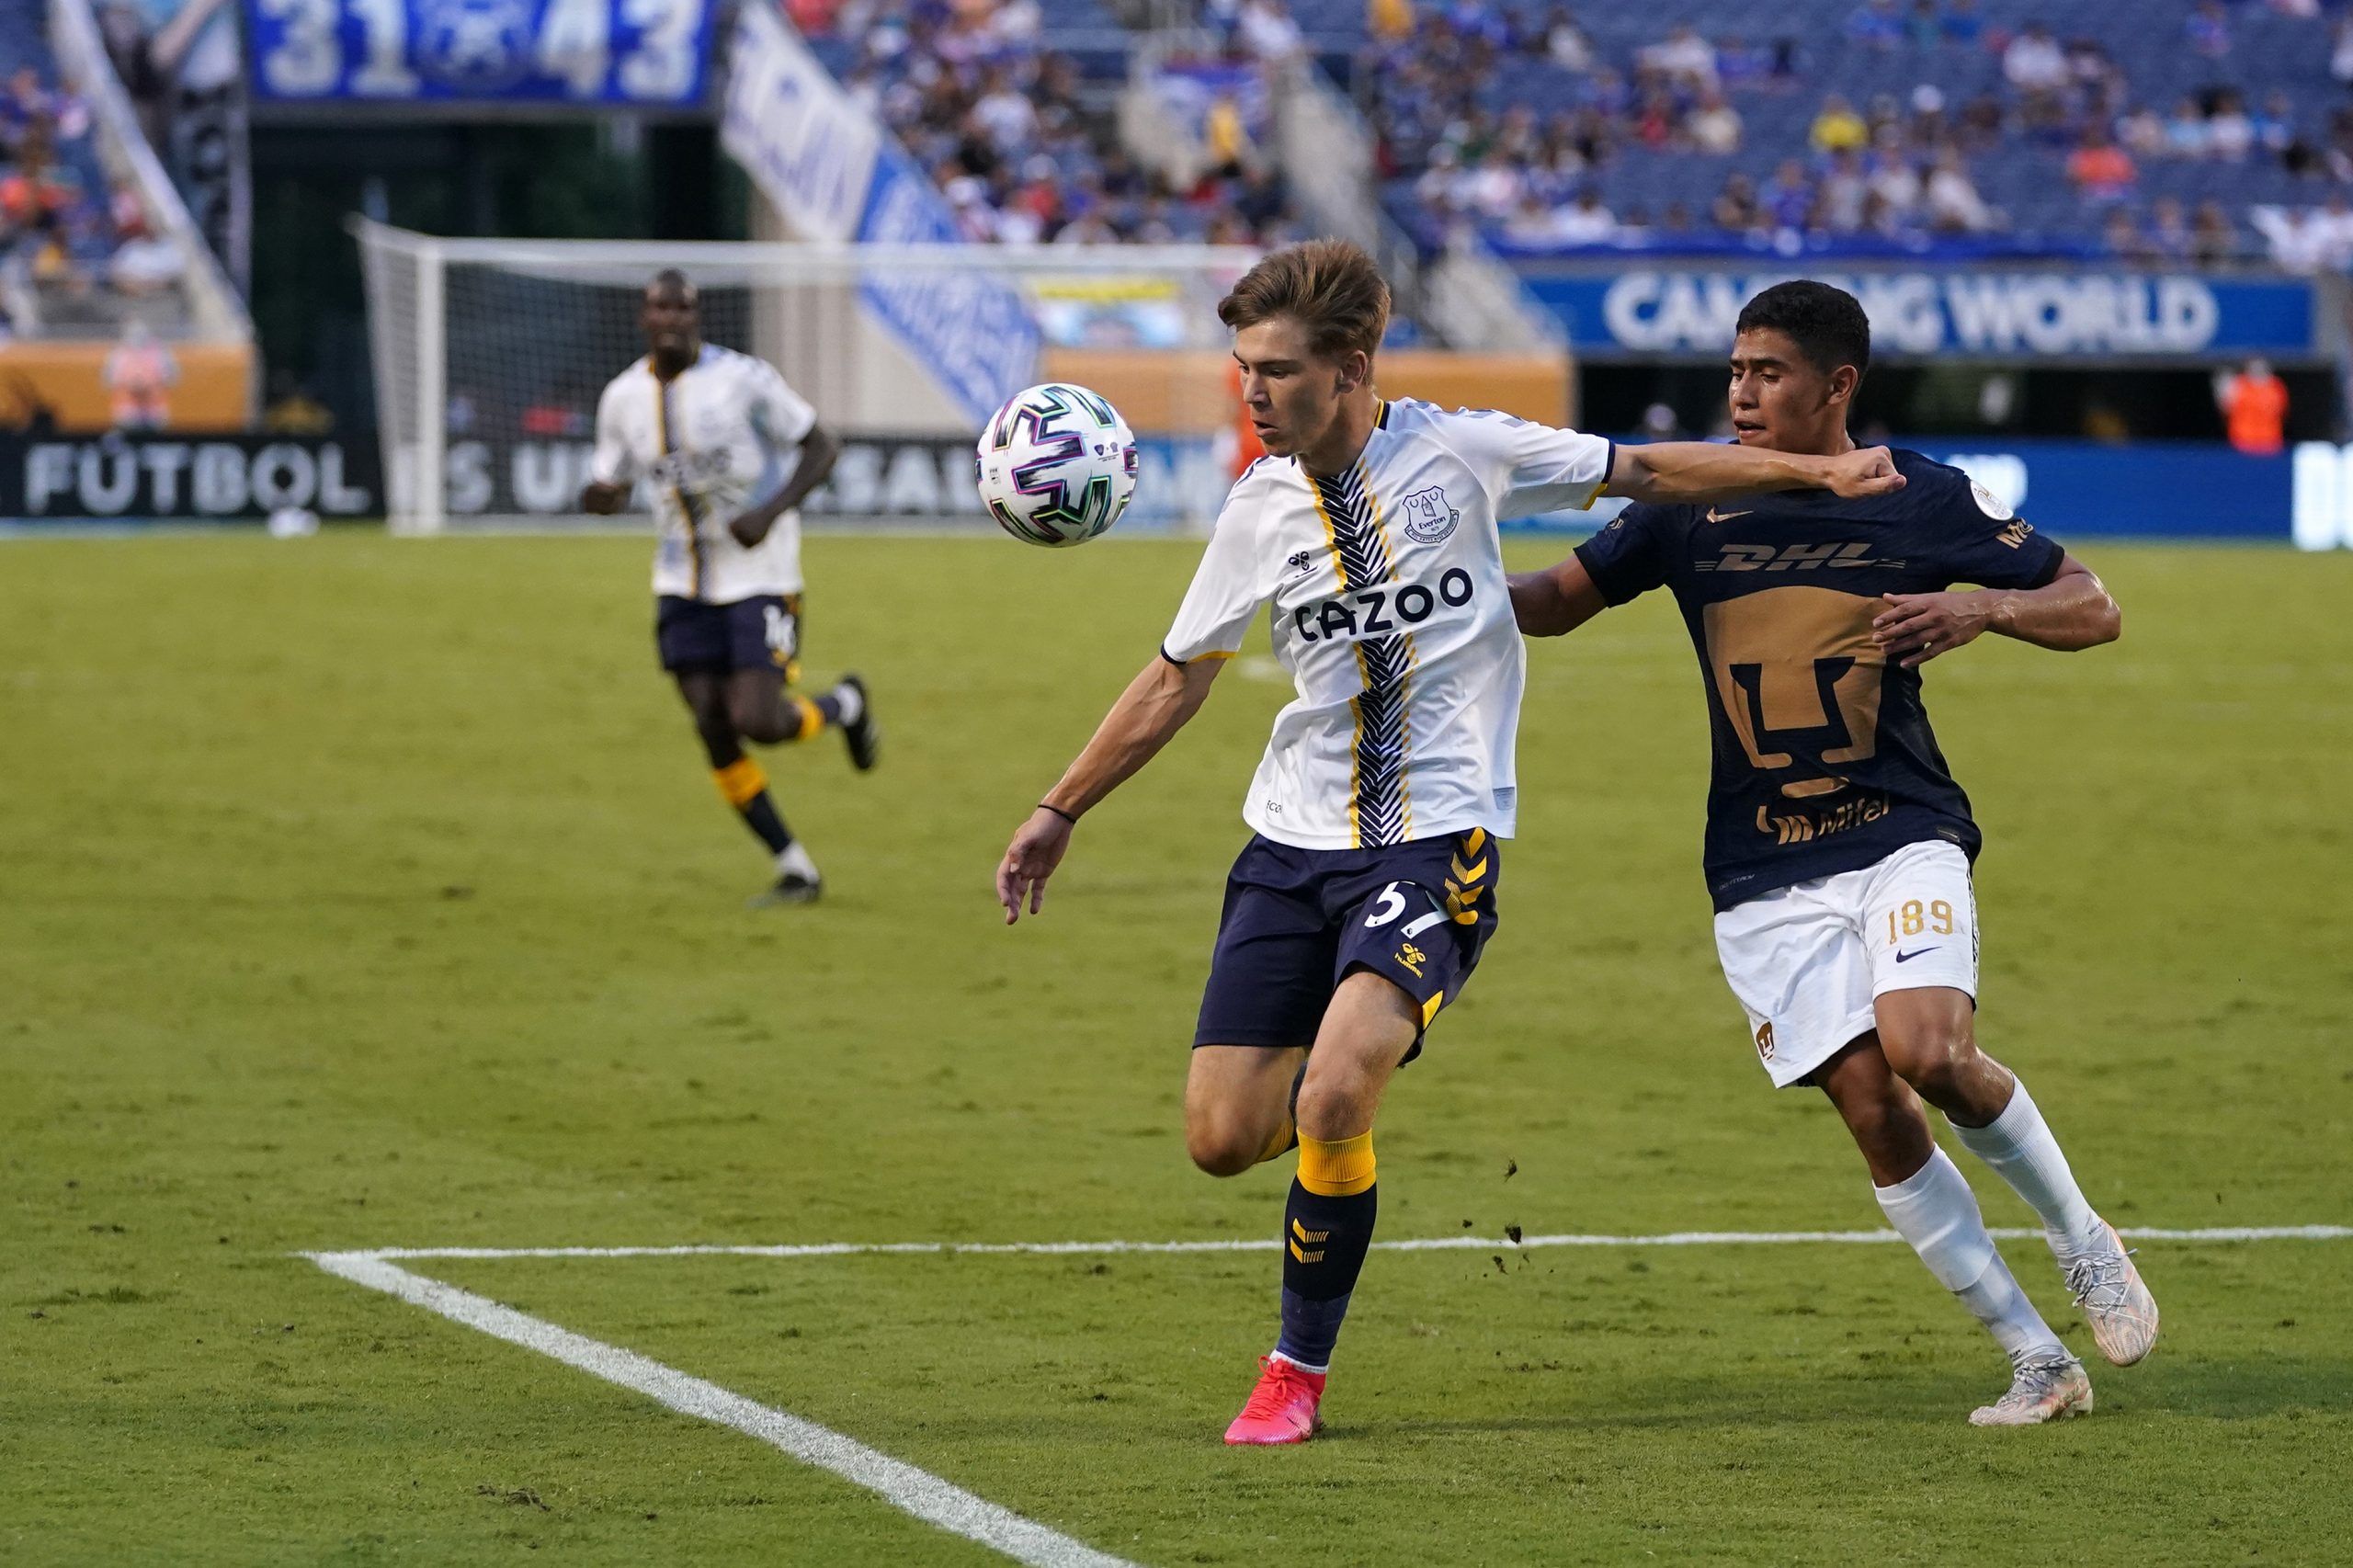 Jul 28, 2021; Orlando, Florida, USA; Everton forward Charlie Whitaker (57) plays the ball in front of UNAM Pumas defender Jesus Rivas (189) in the second half of the 2021 Florida Cup friendly soccer match at Camping World Stadium. Mandatory Credit: Jasen Vinlove-USA TODAY Sports